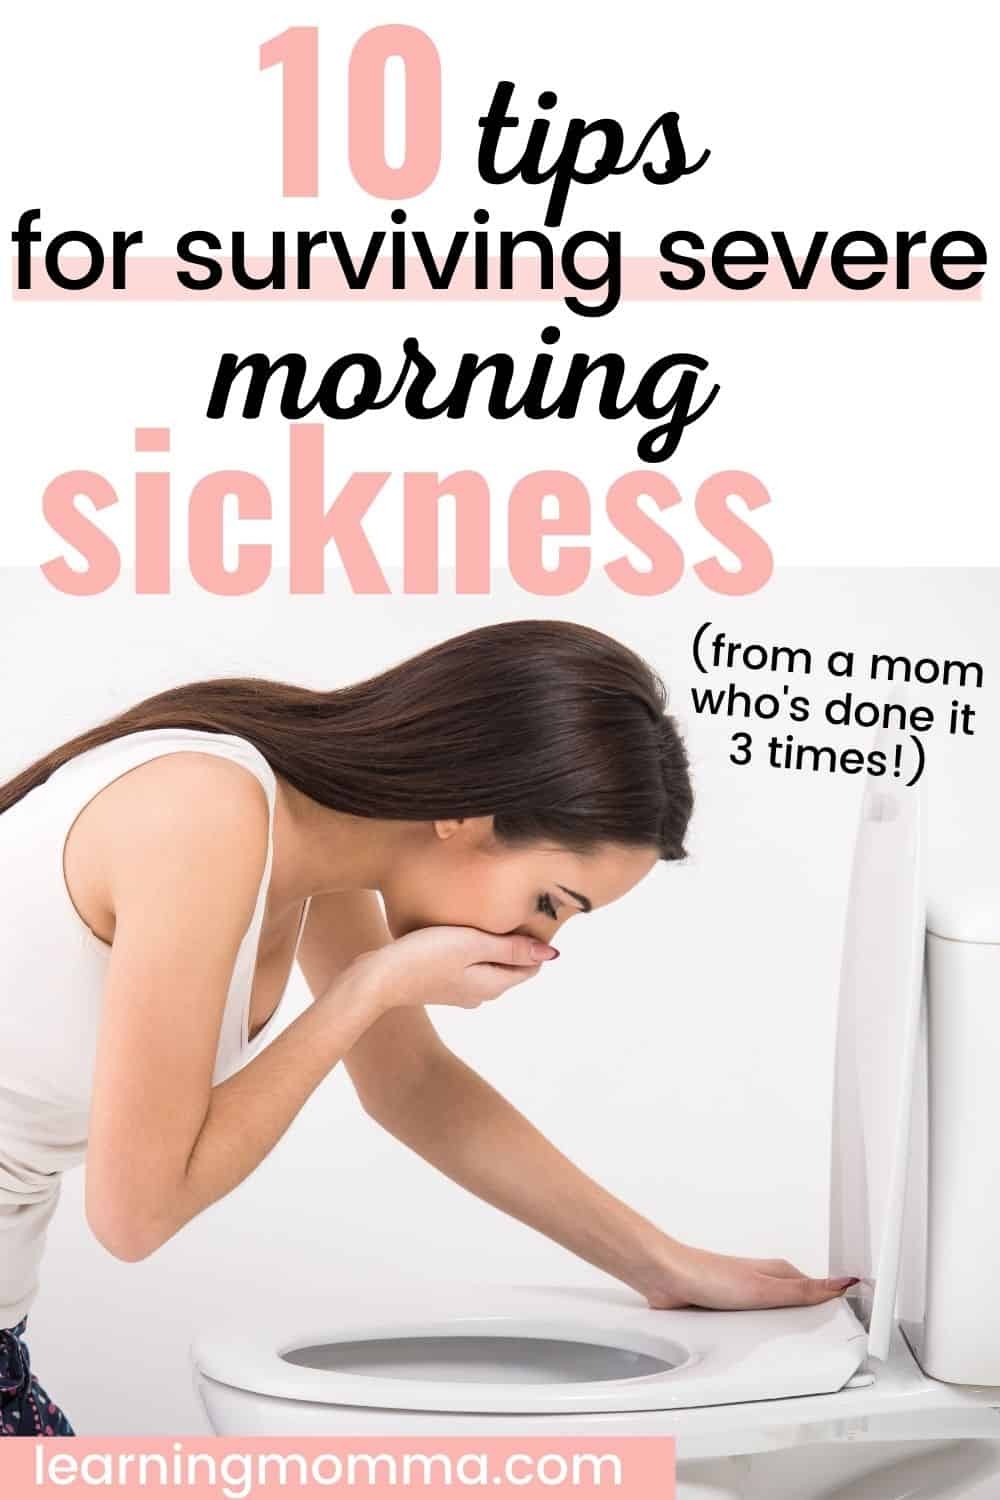 Morning Sickness What Does Pregnancy Nausea Feel Like